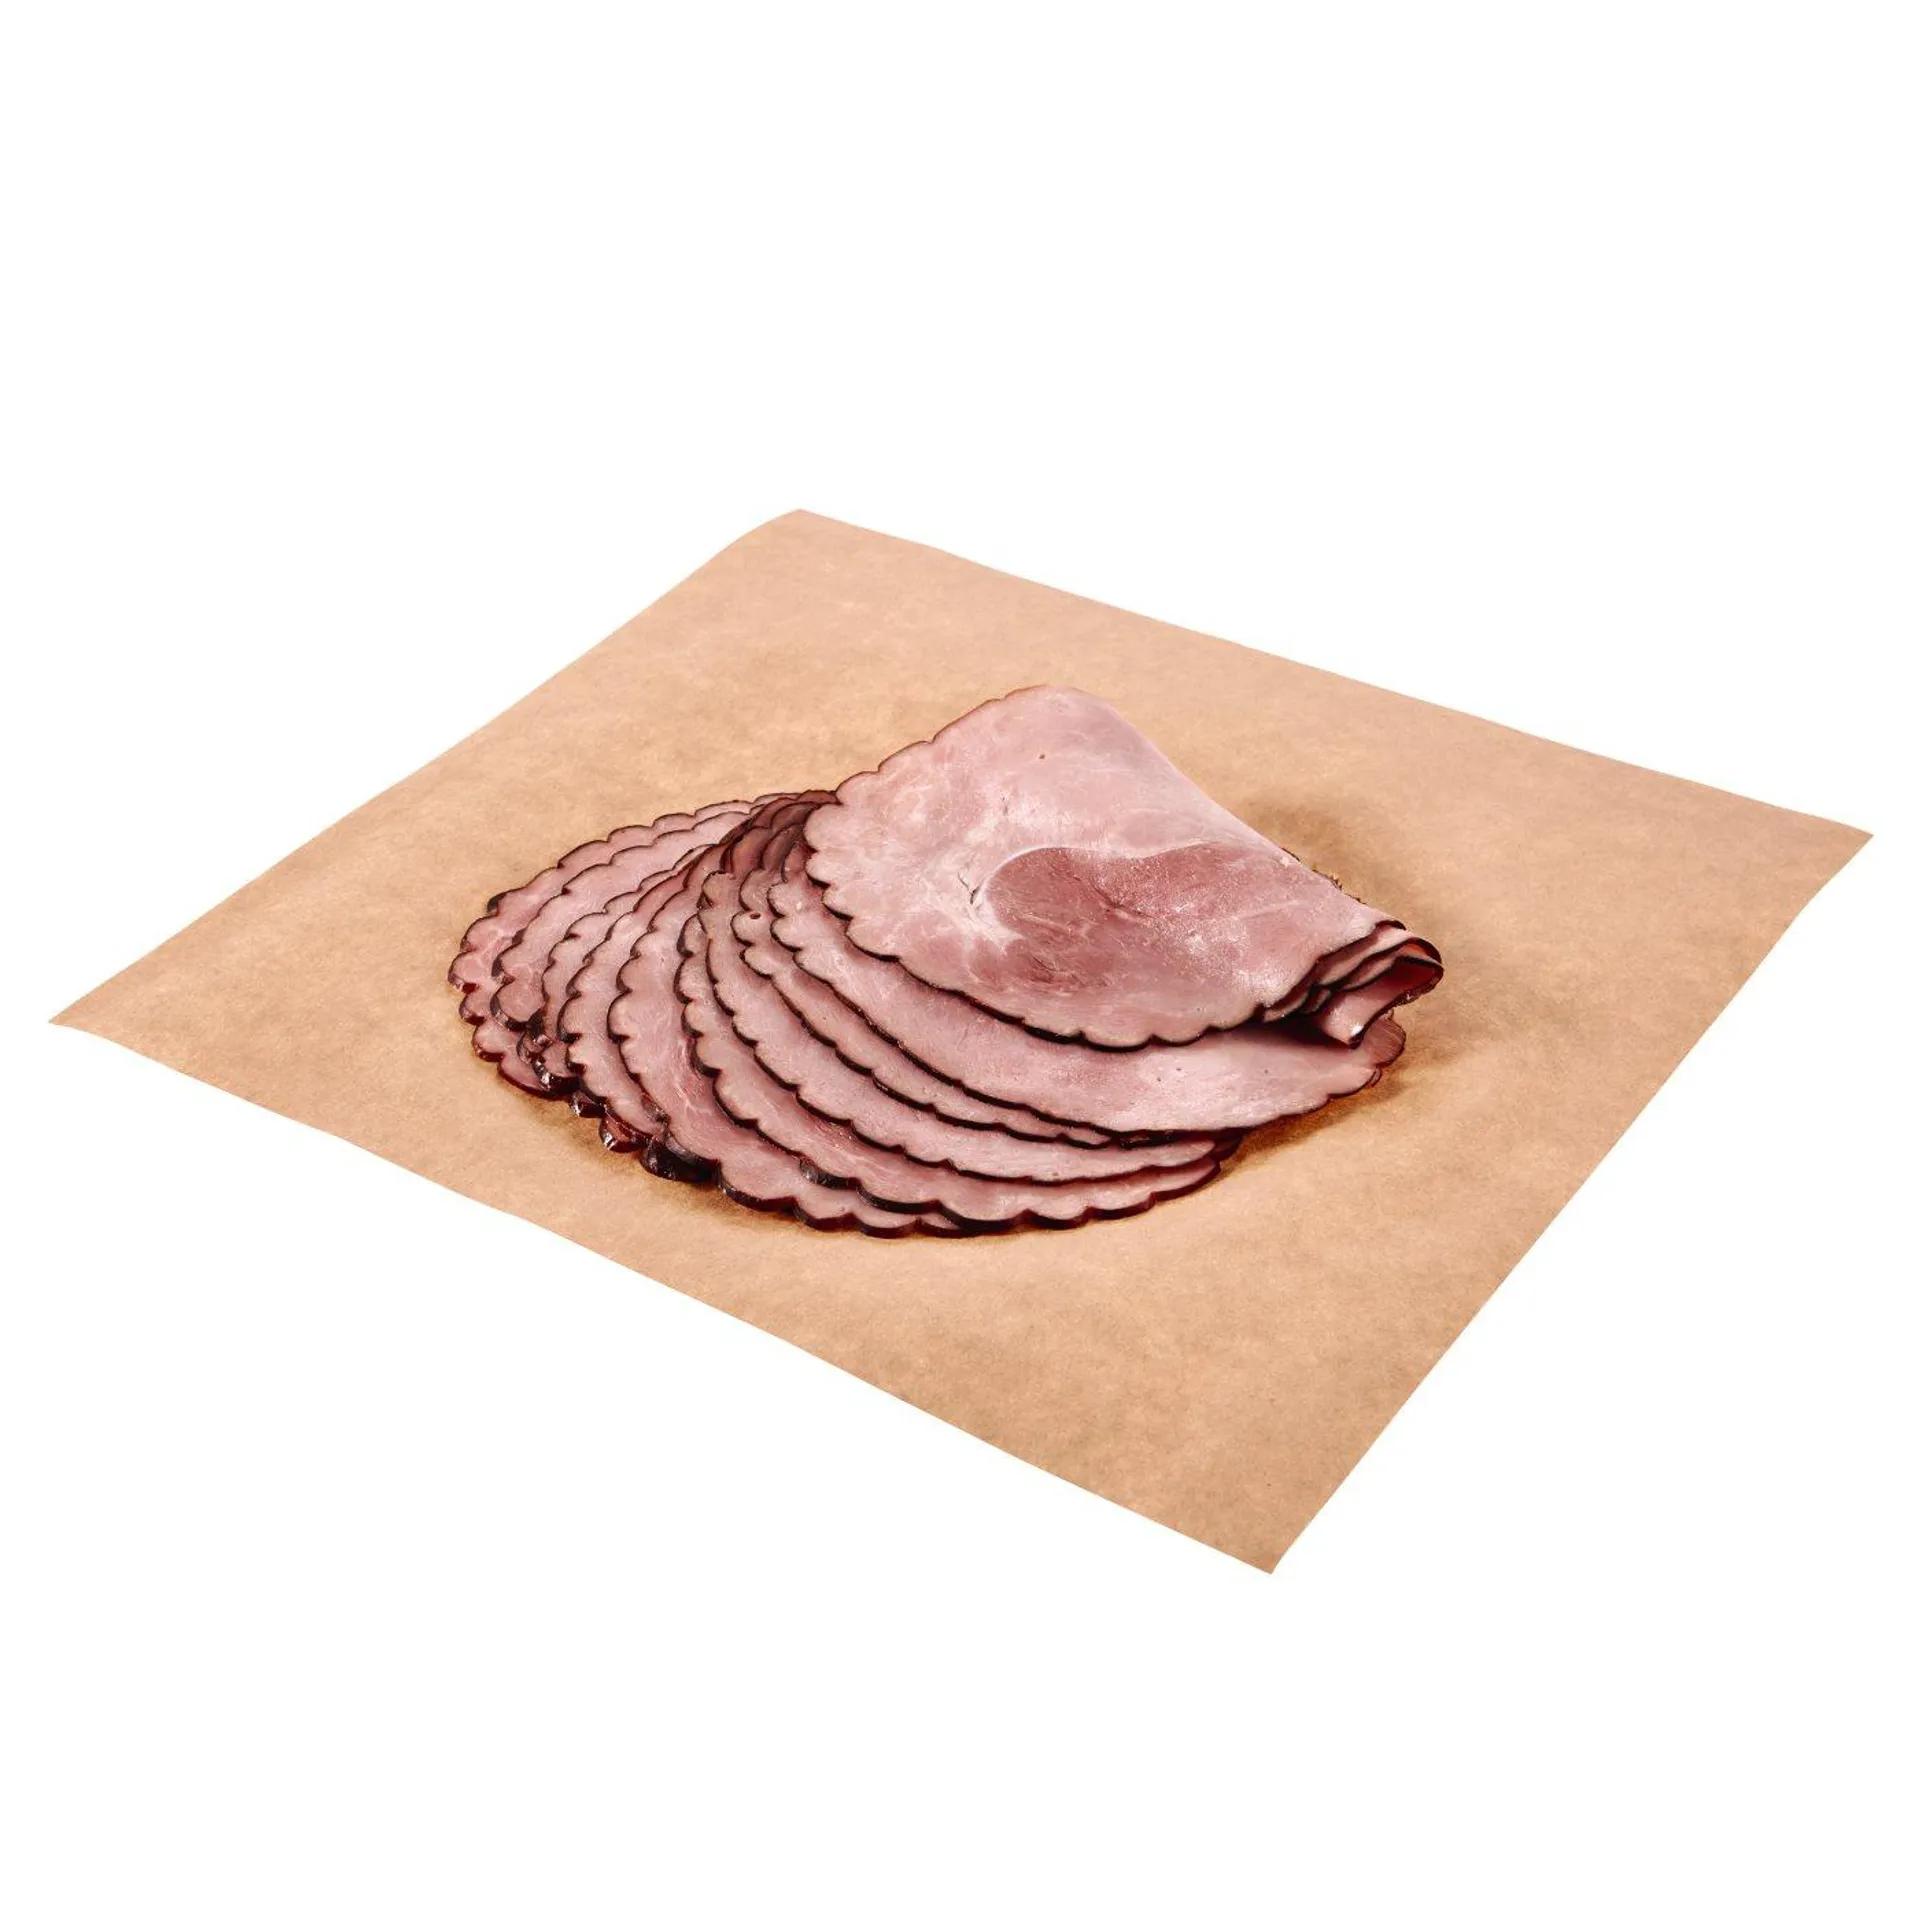 Nob Hill Trading Co. Black Forest Smoked Ham, Sliced